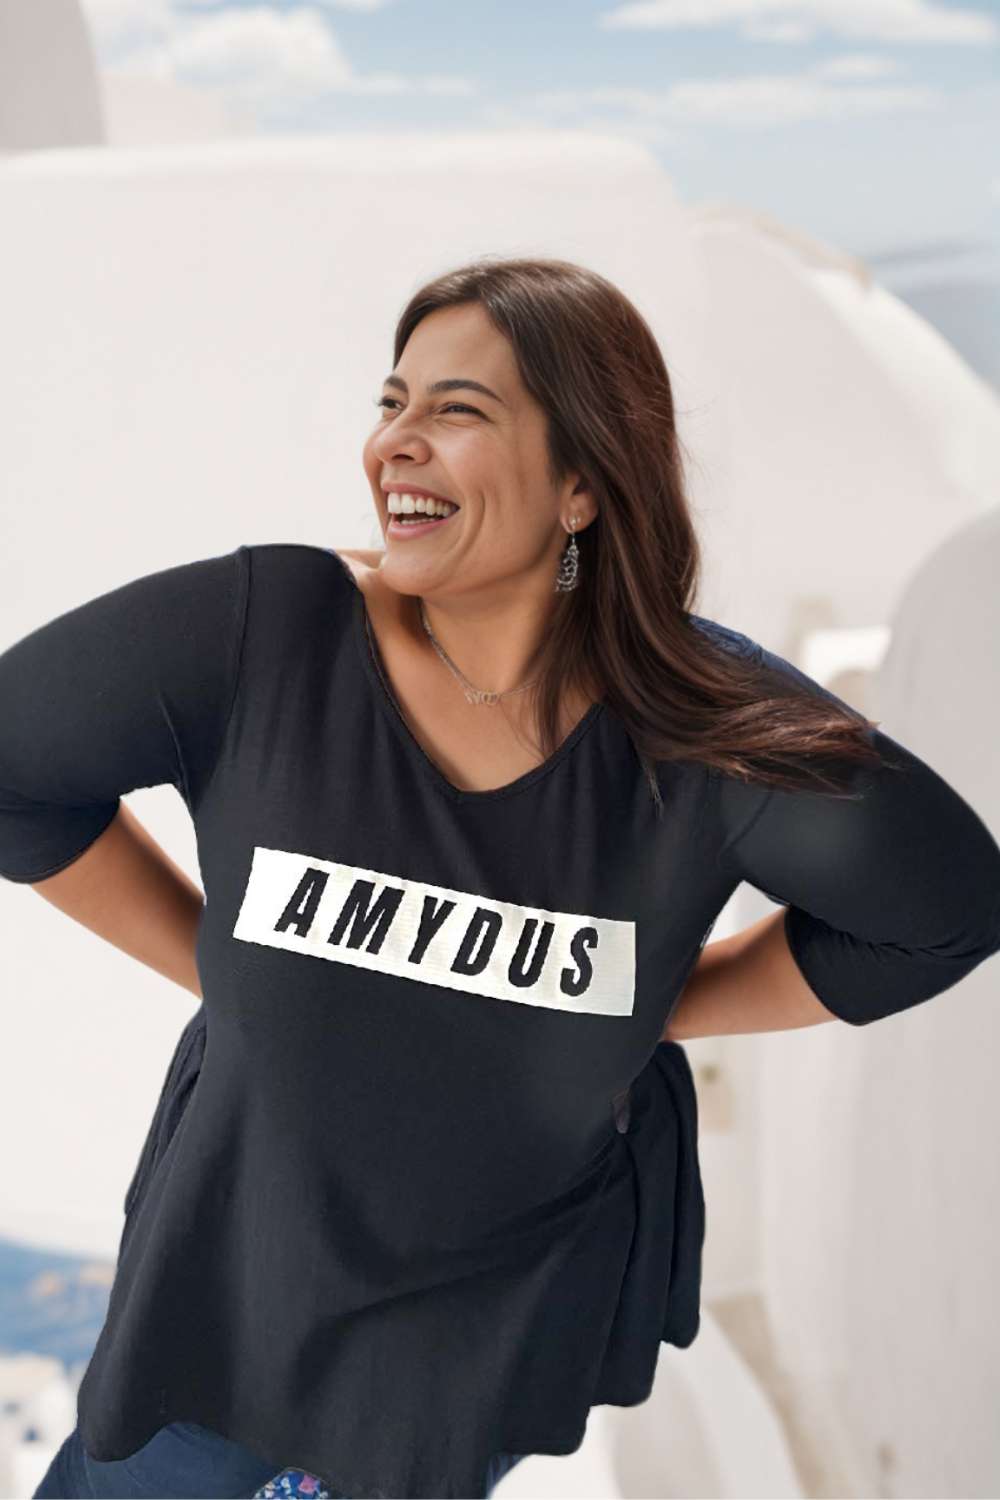 Amydus Plus Size Clothing : Beyond Measure The Story 